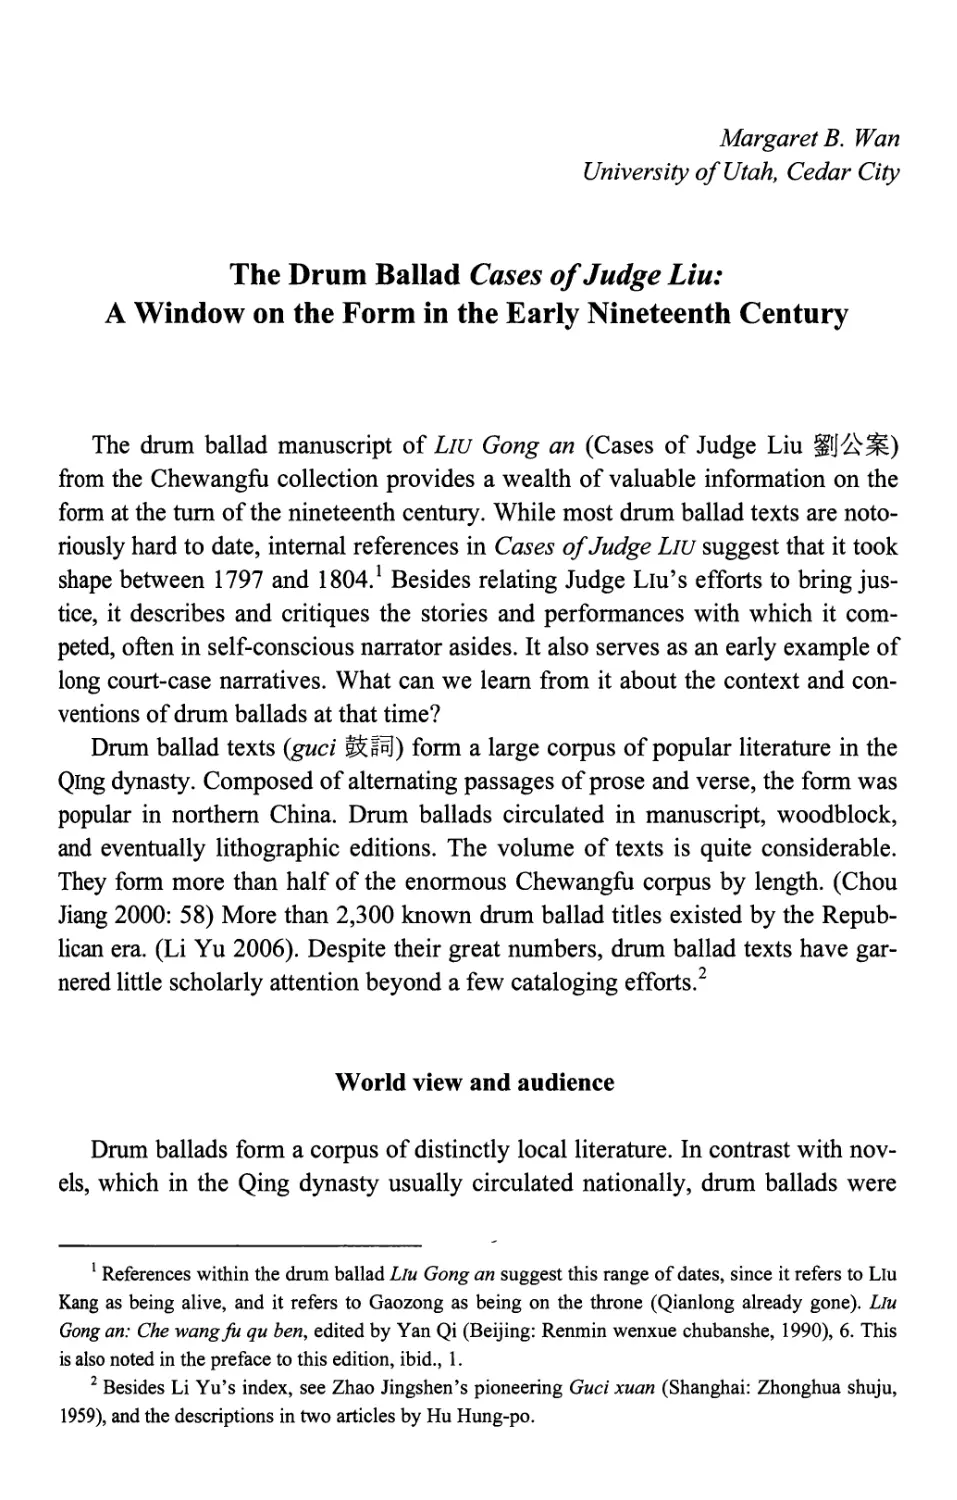 Margaret В. Wan. The Drum Ballad Cases of Judge Liu: A Window on the Form in the Early Nineteenth Century